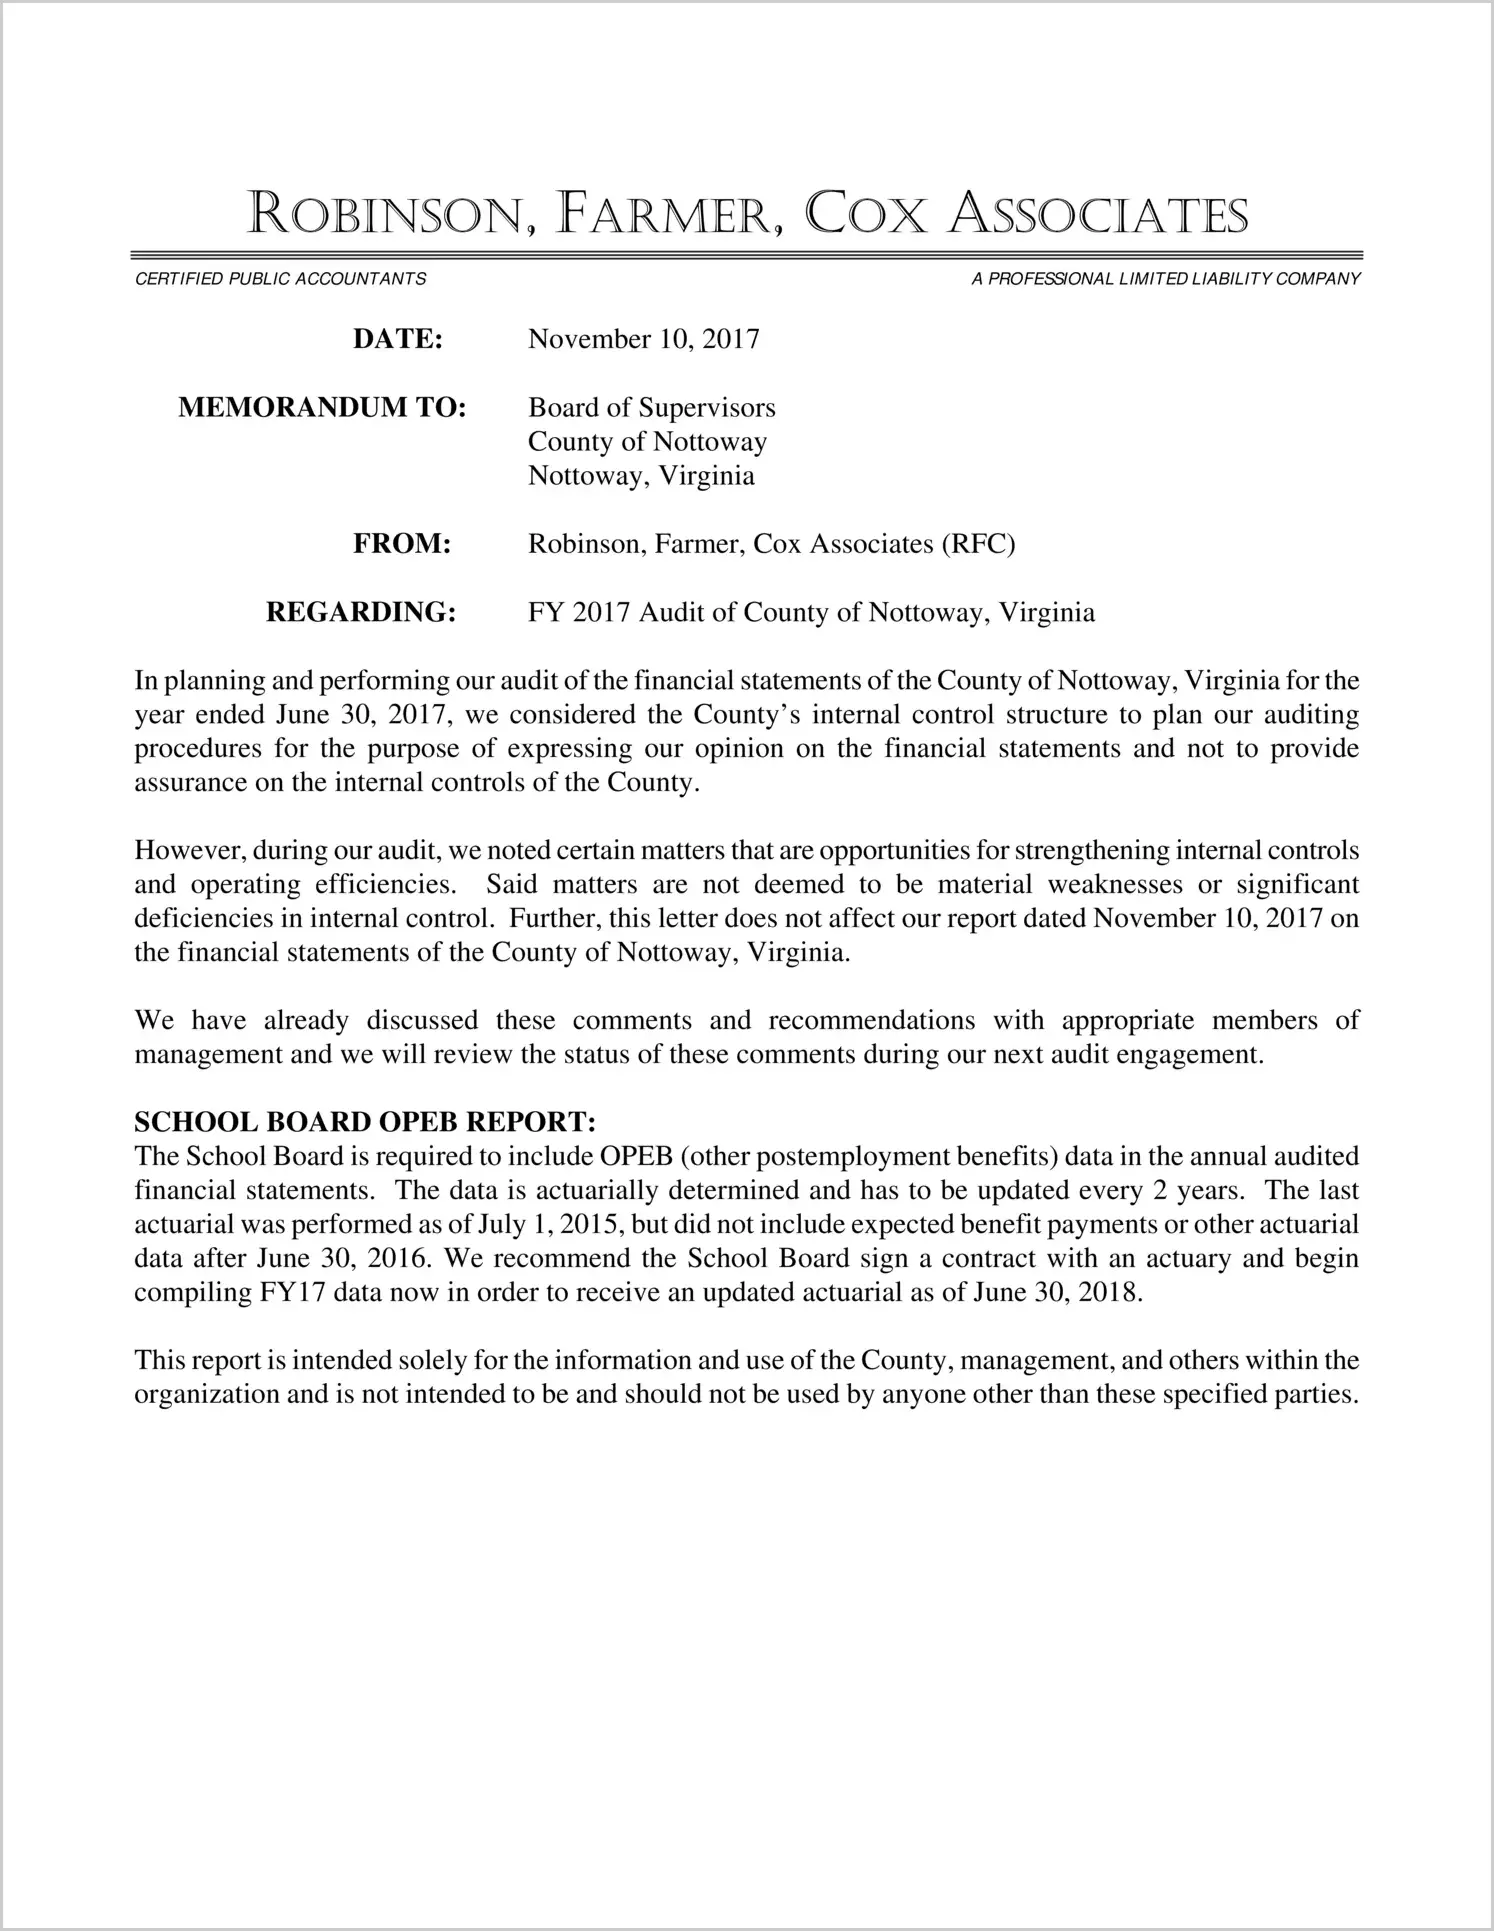 2017 Management Letter for County of Nottoway